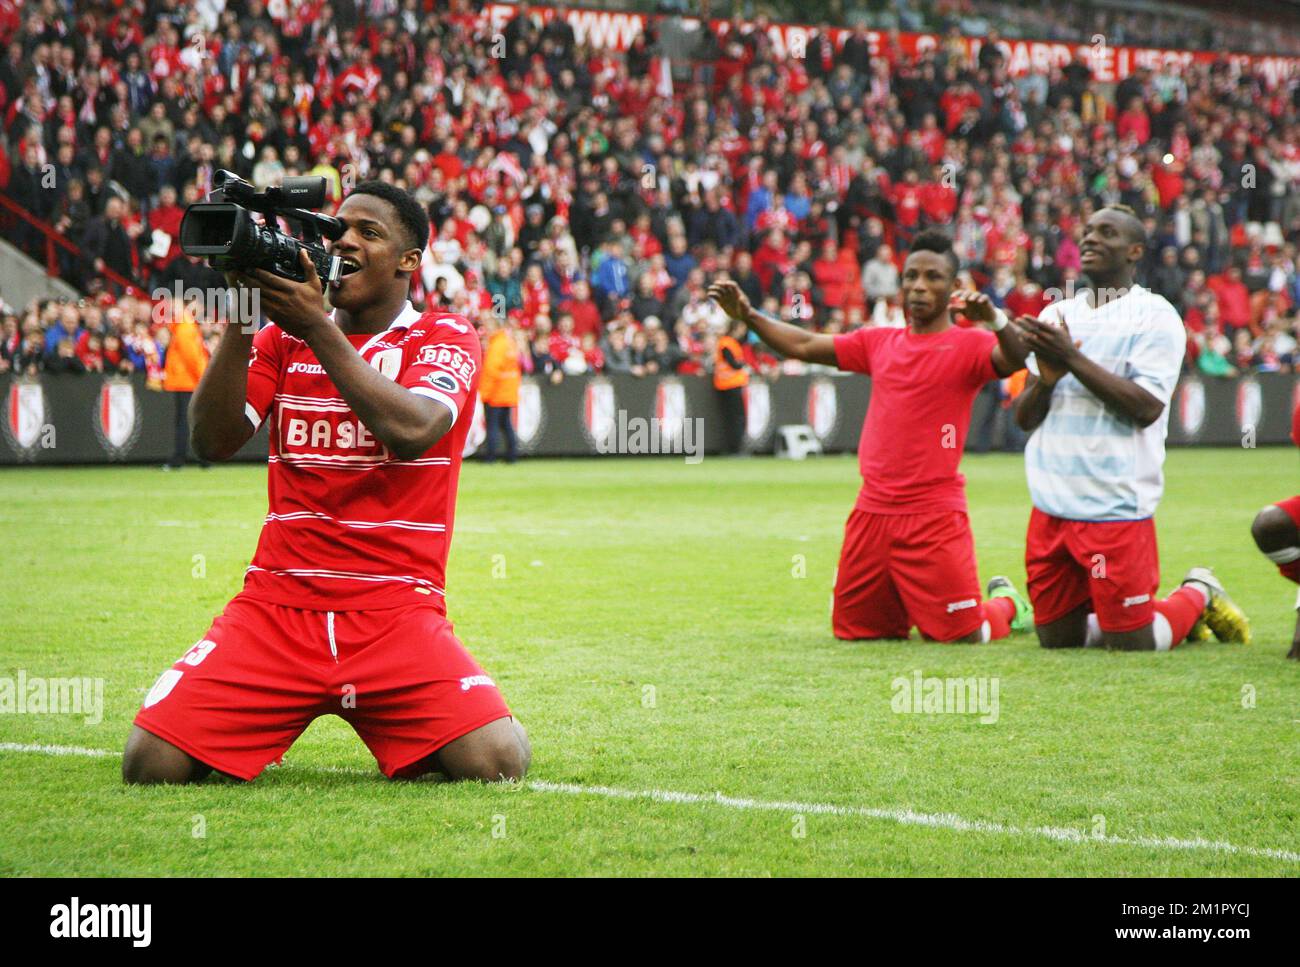 20130526 - LIEGE, BELGIUM: Standard's Michy Batshuayi films with a camera  after winning the match Standard de Liege versus AA Gent, the return leg in  the final of the fourth team in